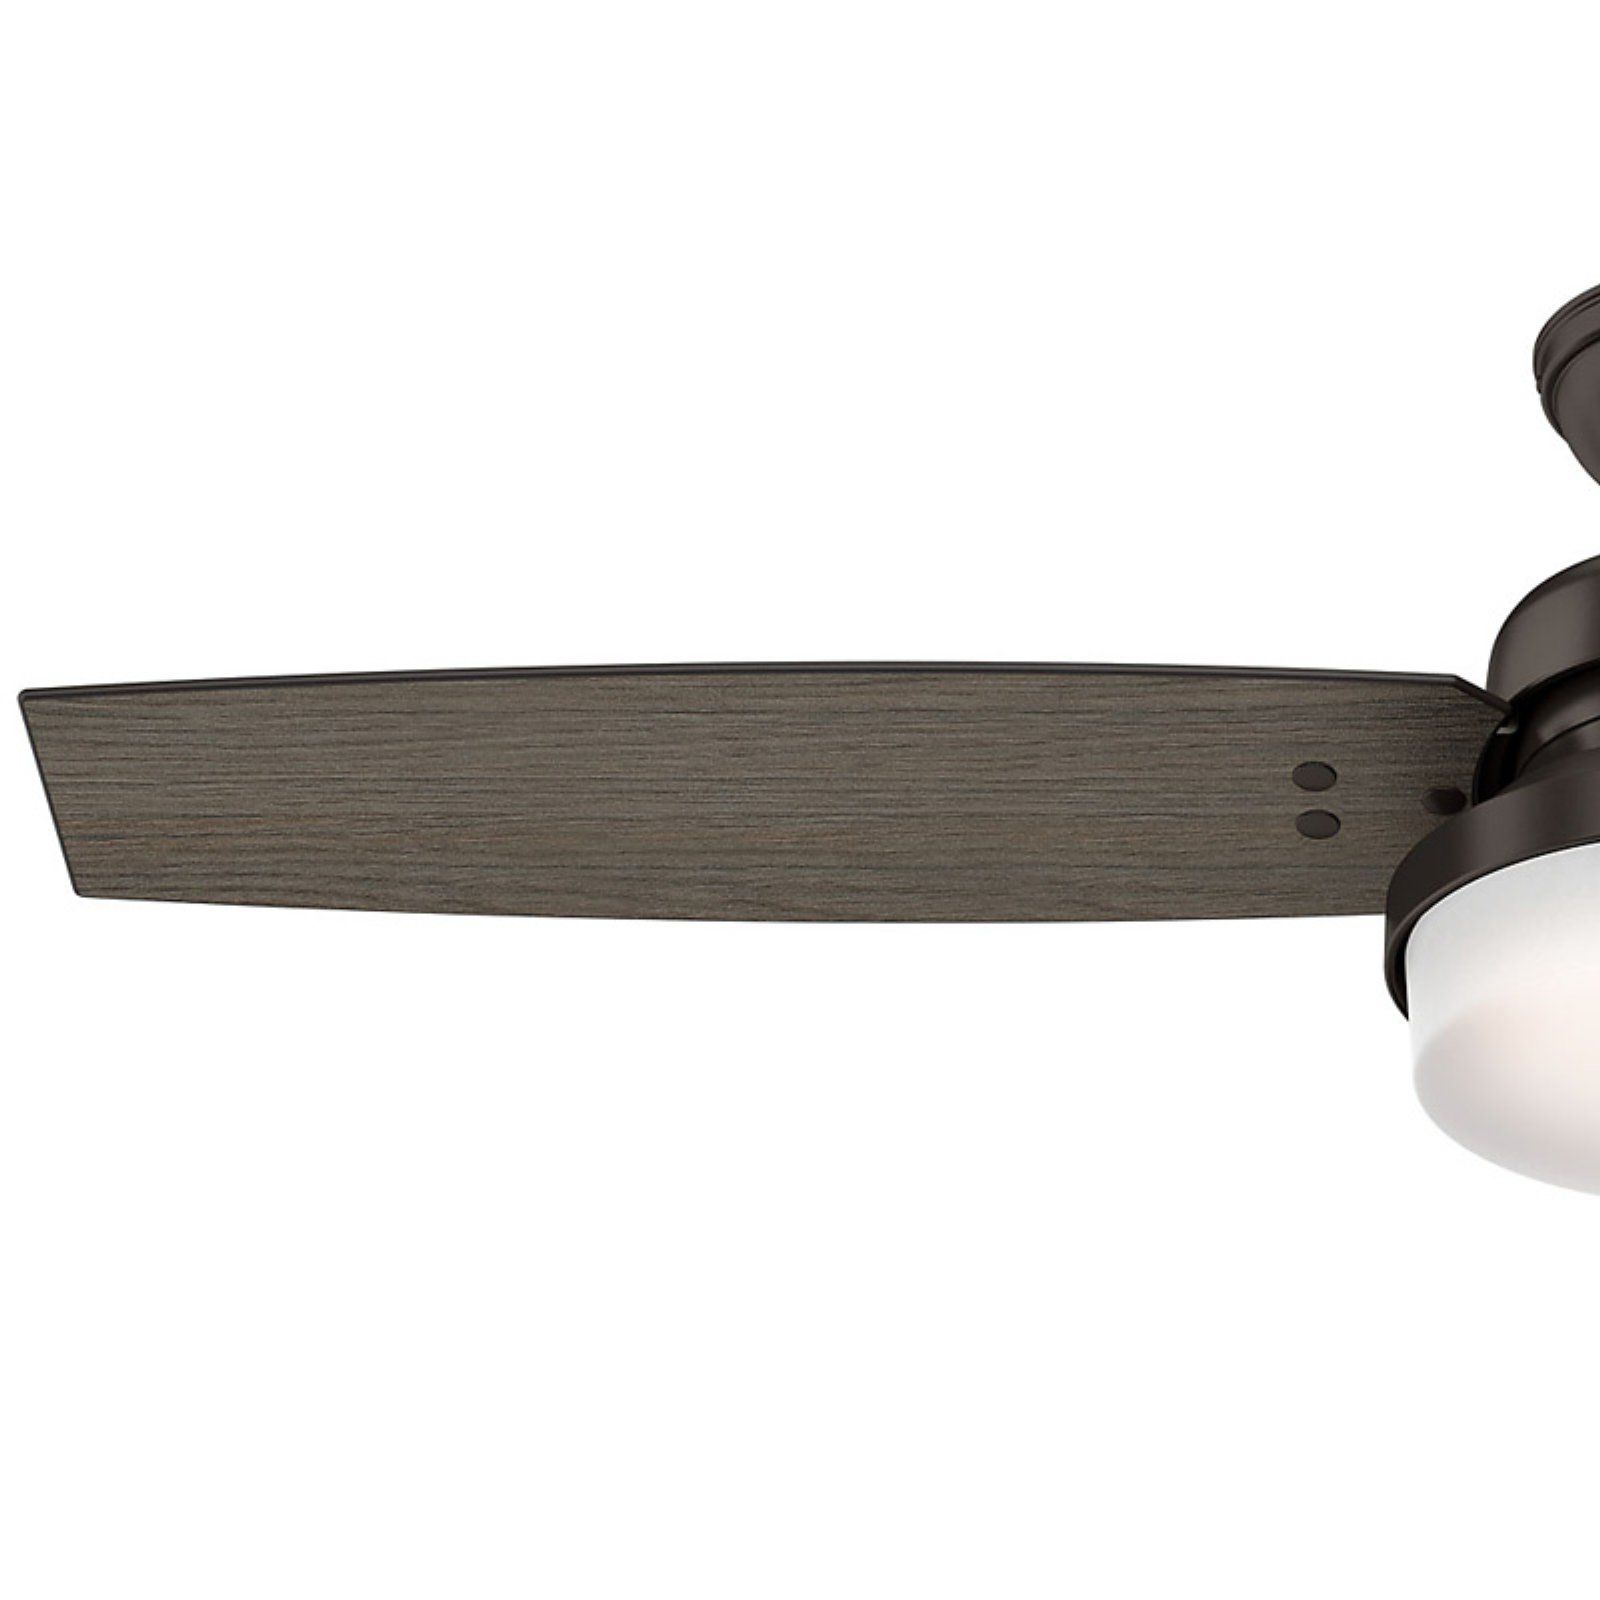 2020 Hunter 52" Sentinel Brushed Slate Ceiling Fan With Led Light Kit And Remote  Control Regarding Sentinel 3 Blade Led Ceiling Fans With Remote (View 17 of 20)